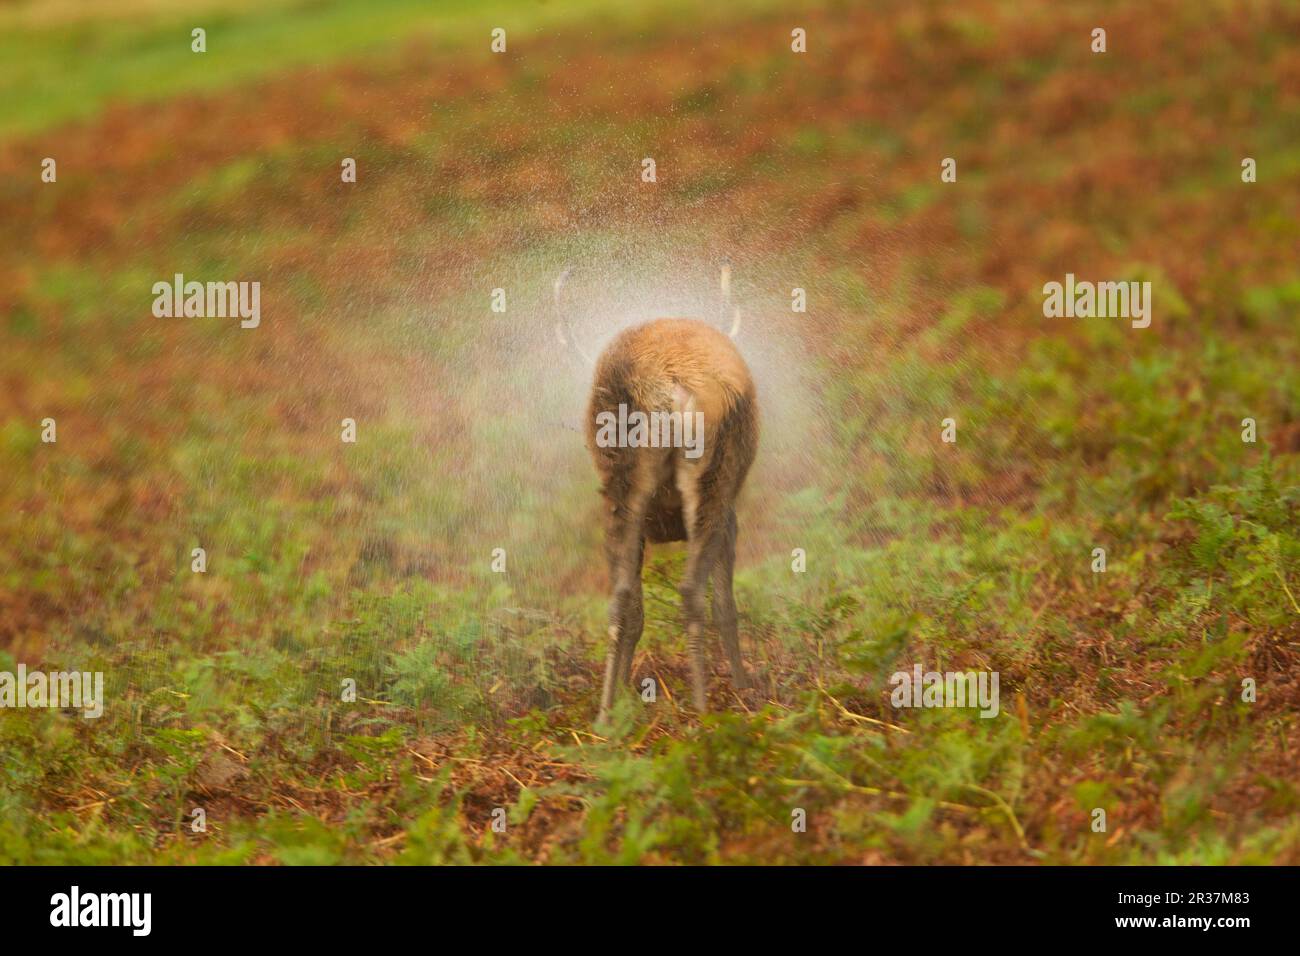 Red Deer (Cervus elaphus) stag, shaking water from coat after rainstorm, during rutting season, Bradgate Park, Leicestershire, England, United Kingdom Stock Photo